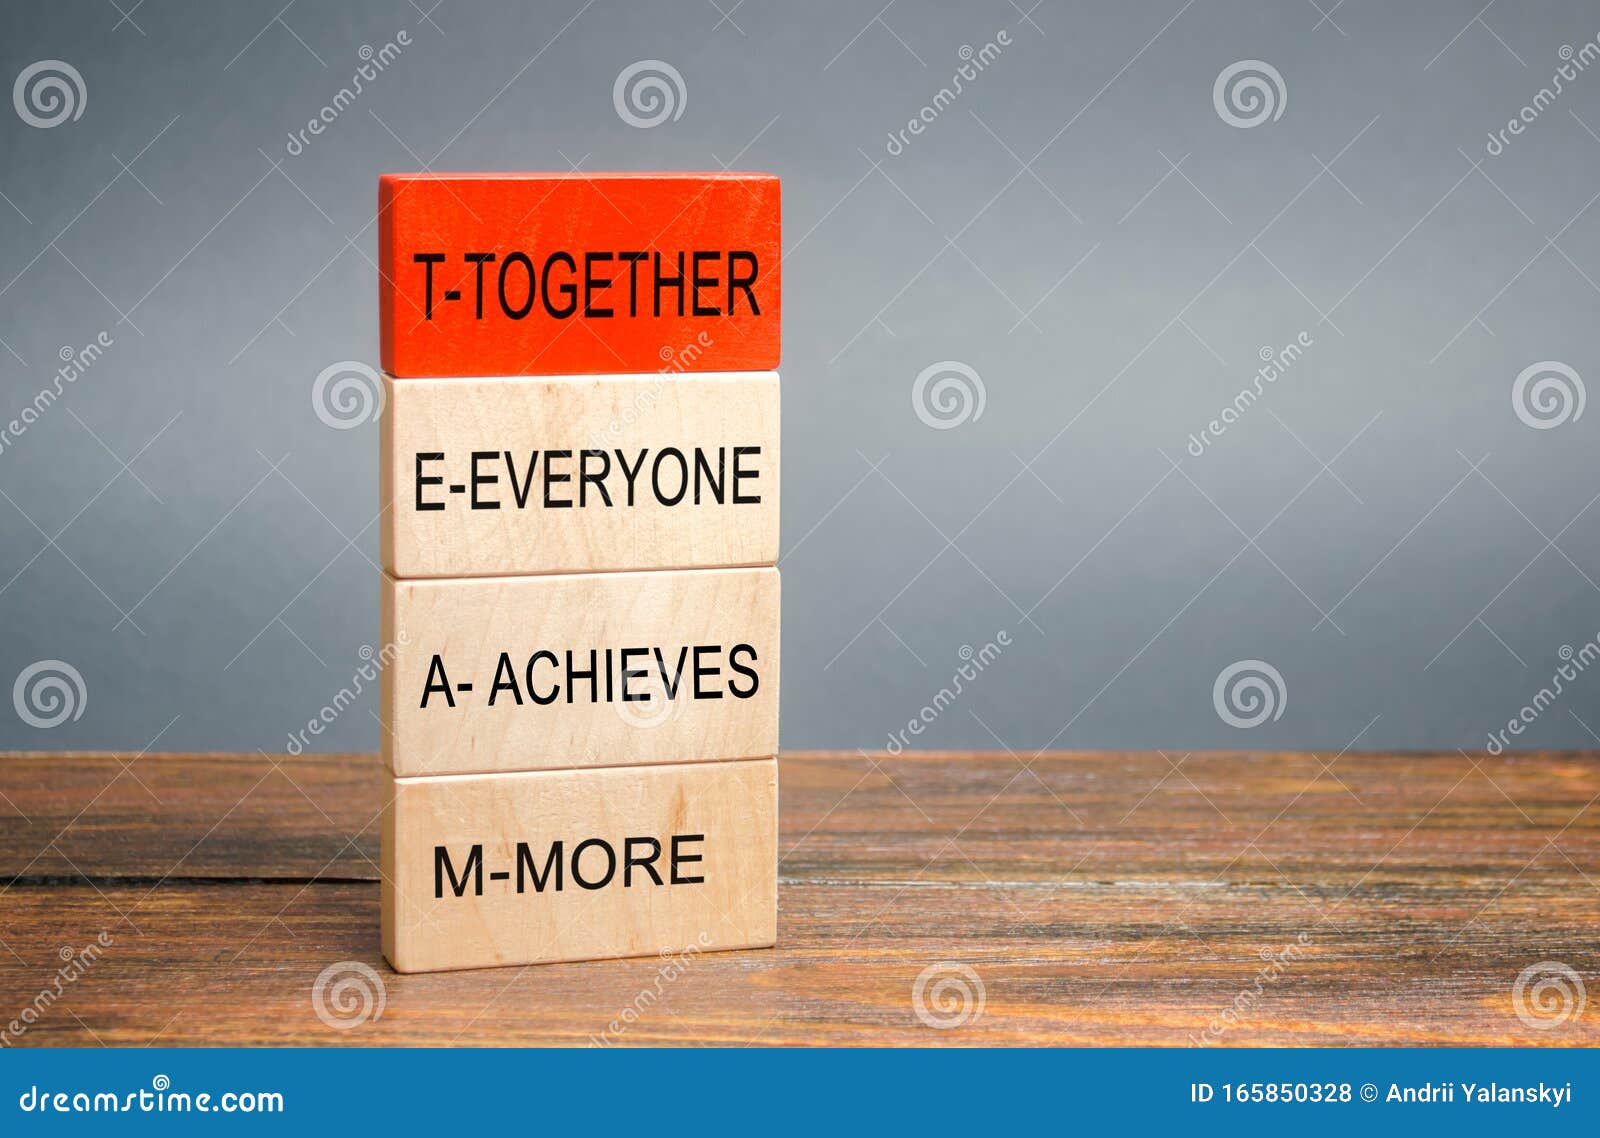 wooden blocks with the word together, everyone, achieves, more. teamwork and team concept. community, support, partnership.